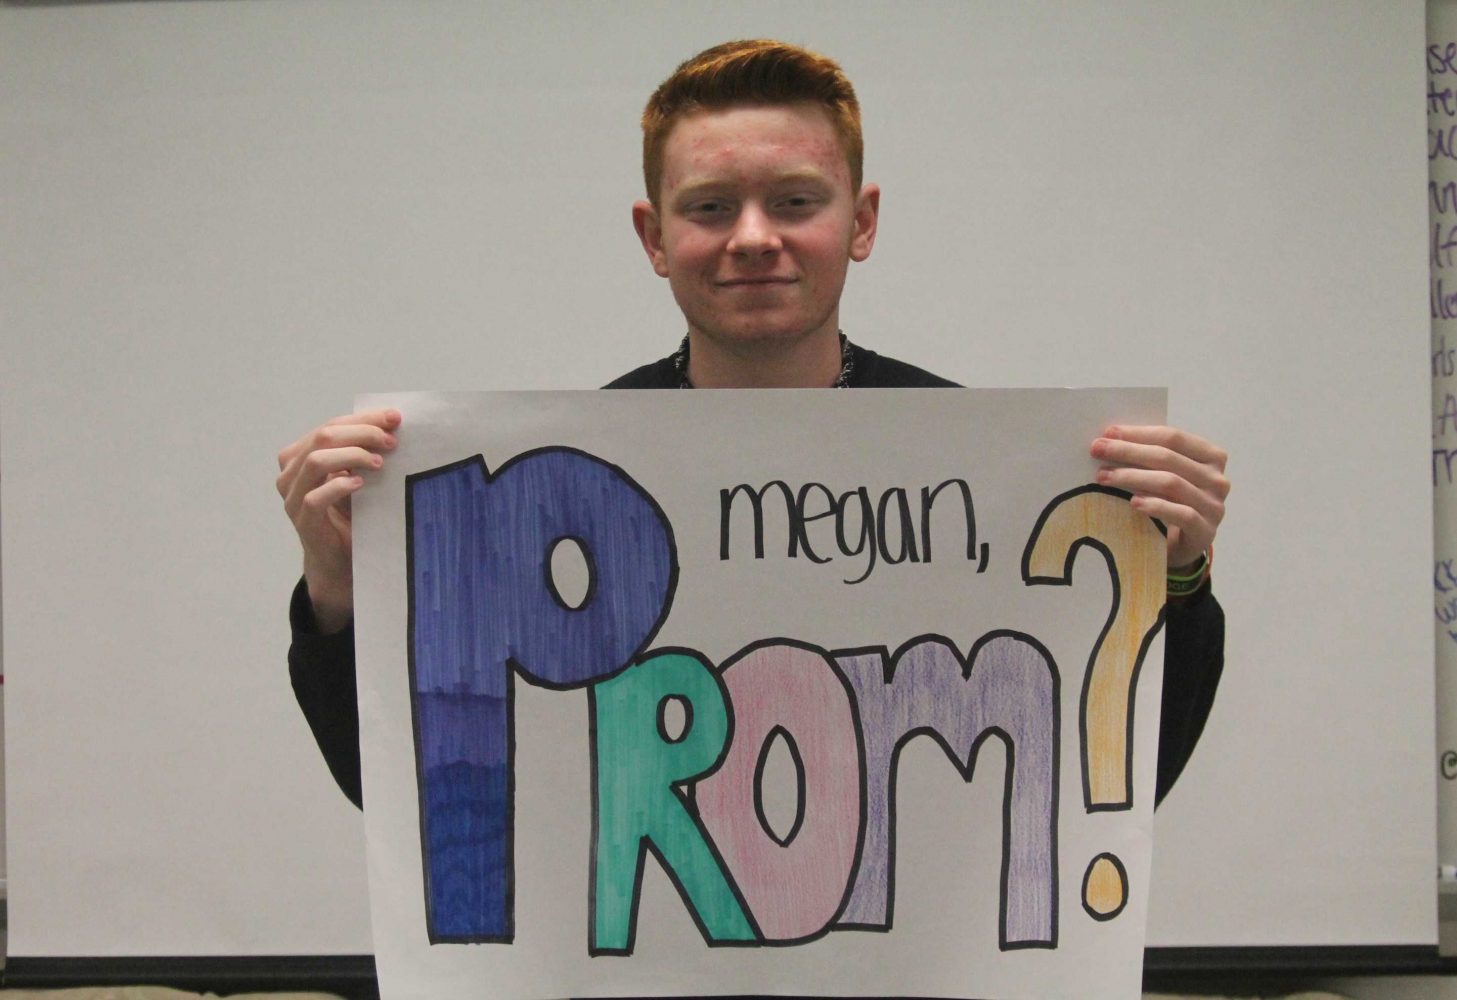 Students get creative with promposals for dates